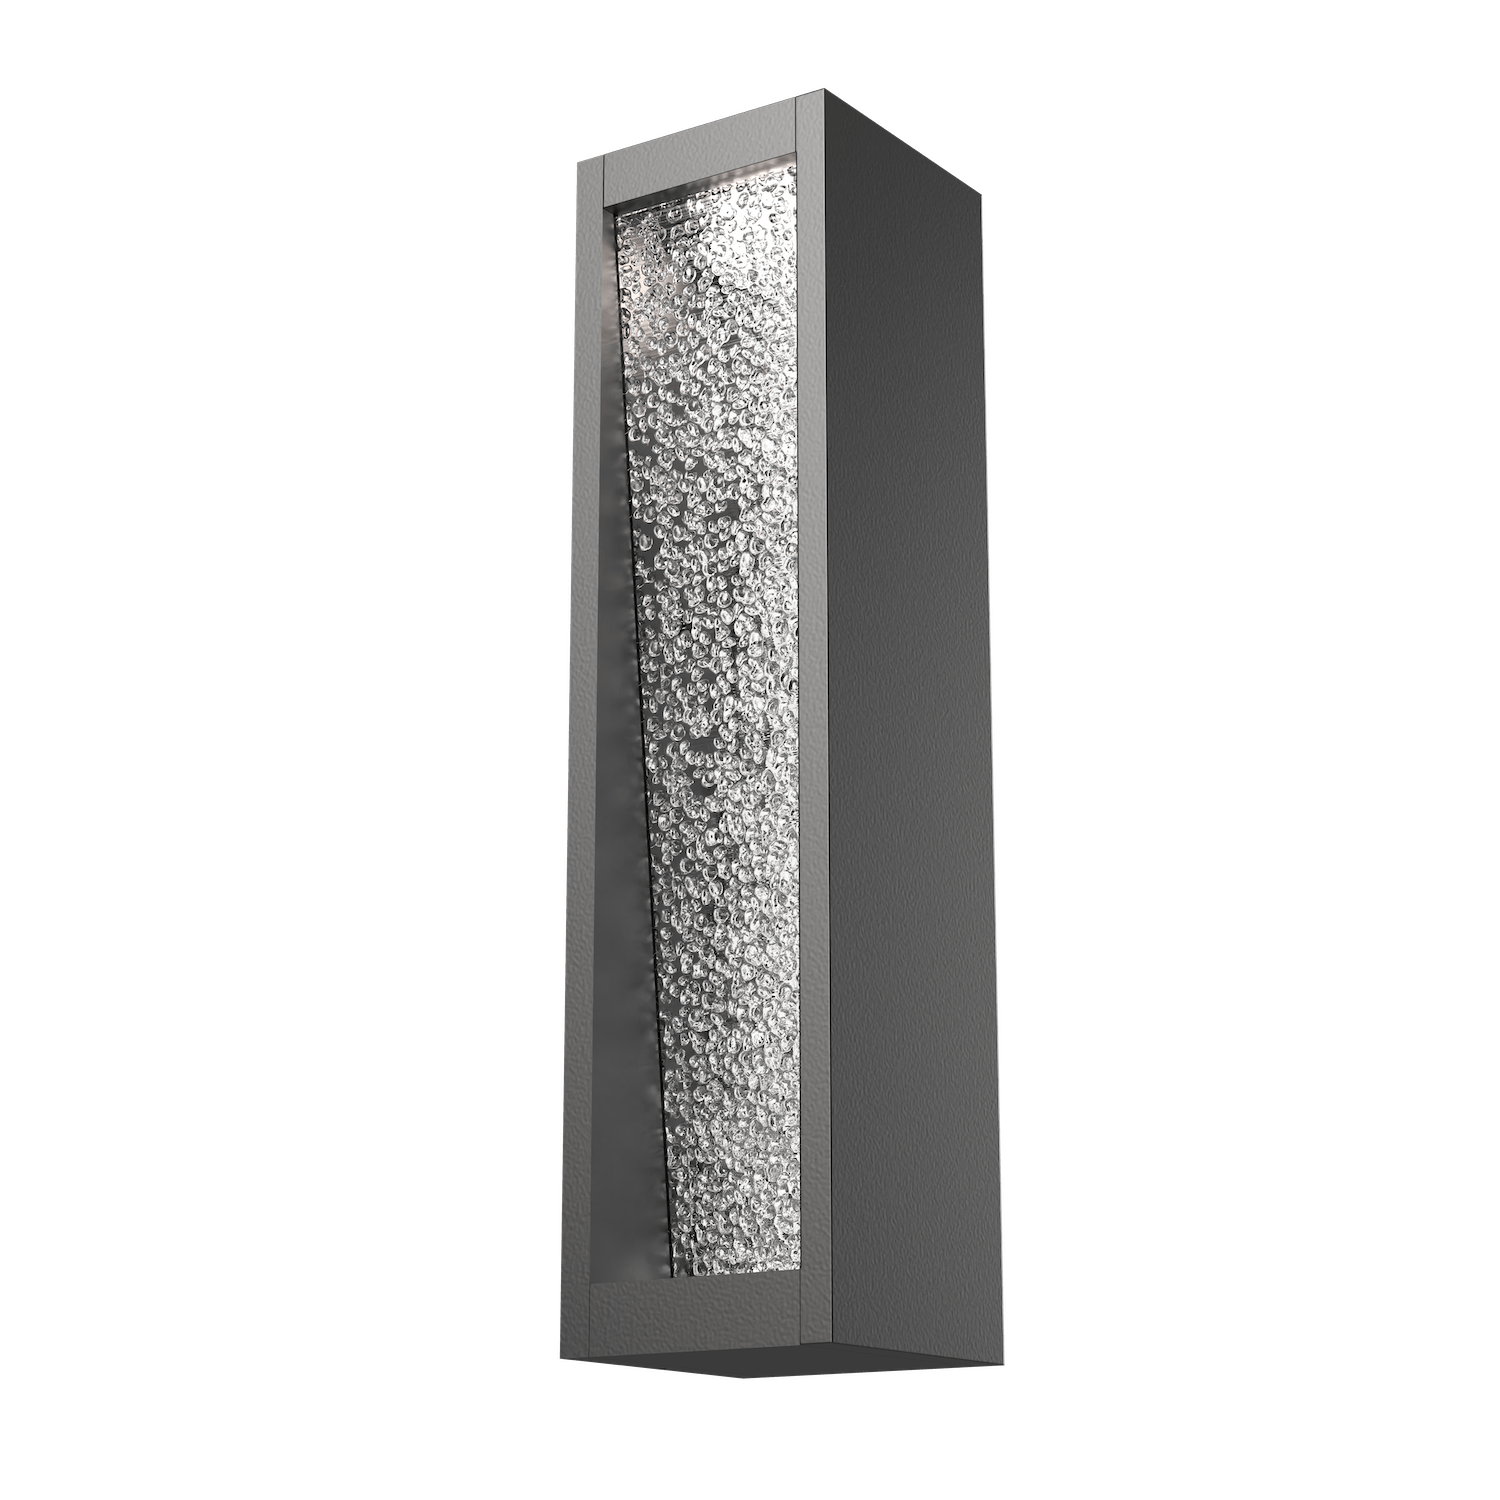 ODB0082-01-AG-CR-Hammerton-Studio-Torrent-18-inch-outdoor-sconce-with-argento-grey-finish-and-crackled-rimelight-glass-shade-and-LED-lamping